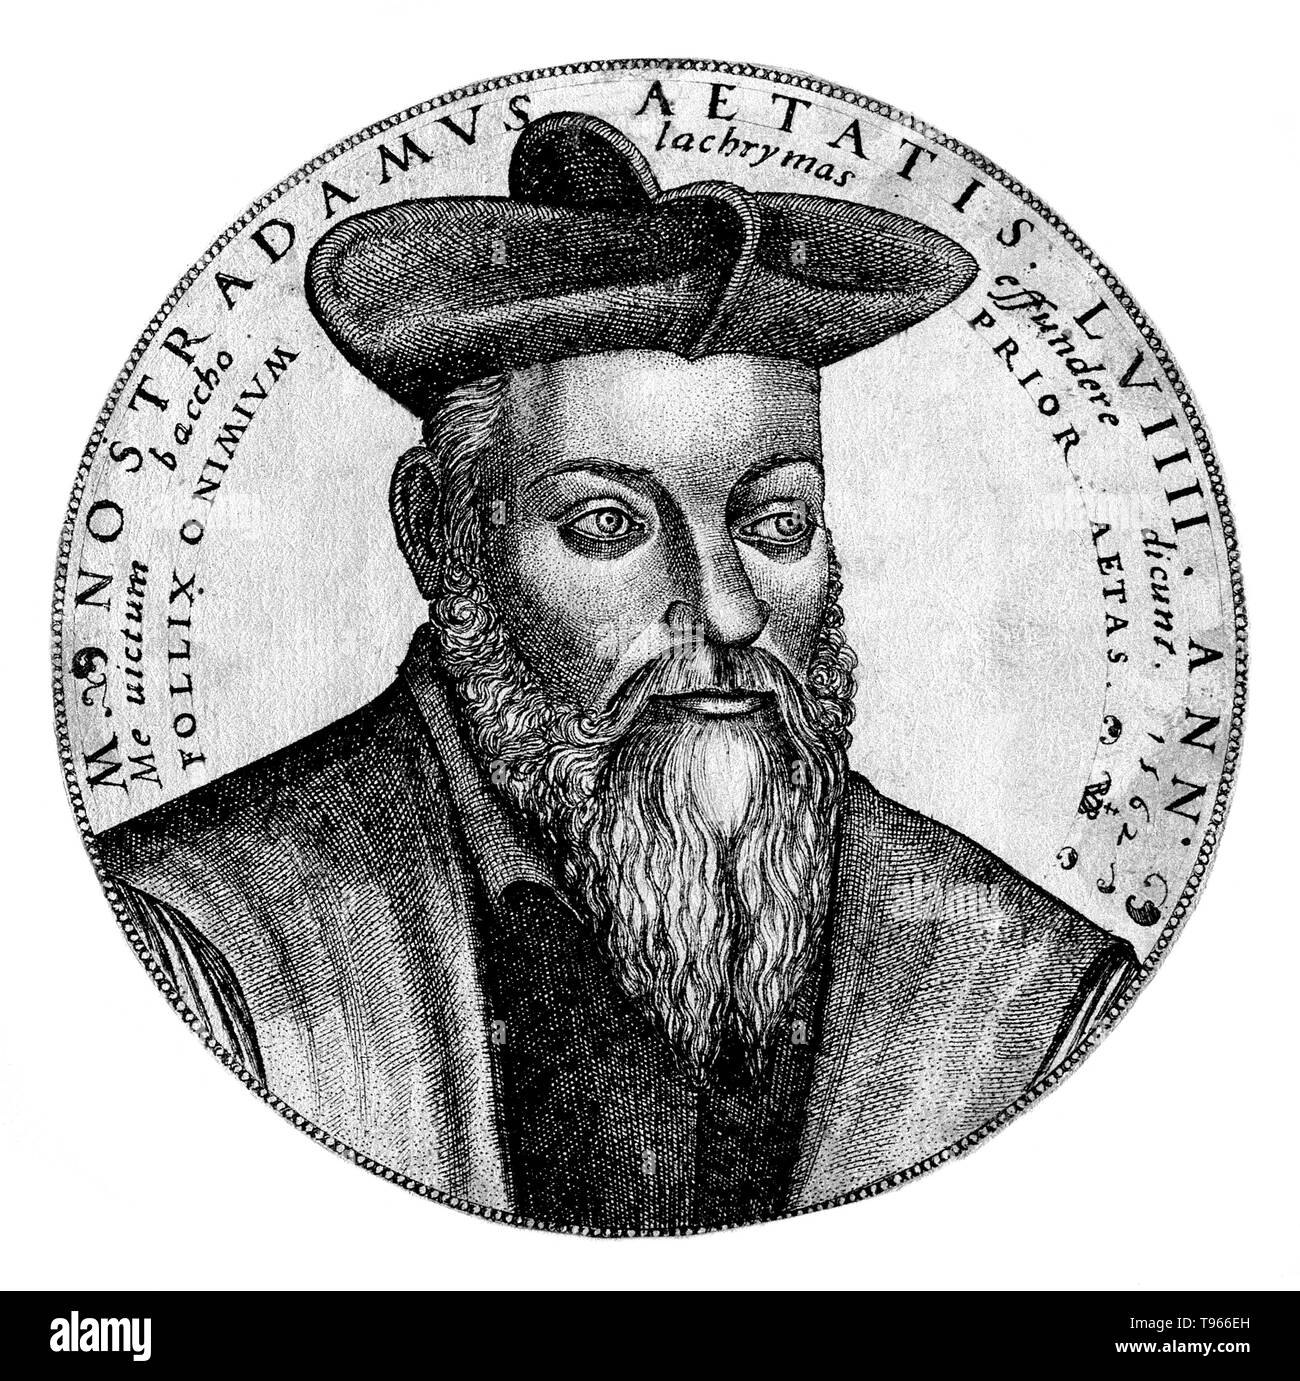 Michel de Nostredame AKA Nostradamus (December 14 or 21 1503 - July 2, 1566) was a French apothecary and reputed seer. He wrote an almanac for 1550 and, as a result of its success, continued writing them for future years as he began working as an astrologer for various wealthy patrons. His Les Propheties, a collection of 942 poetic quatrains predicting future events. His book, first published in 1555, has rarely been out of print since his death. Stock Photo